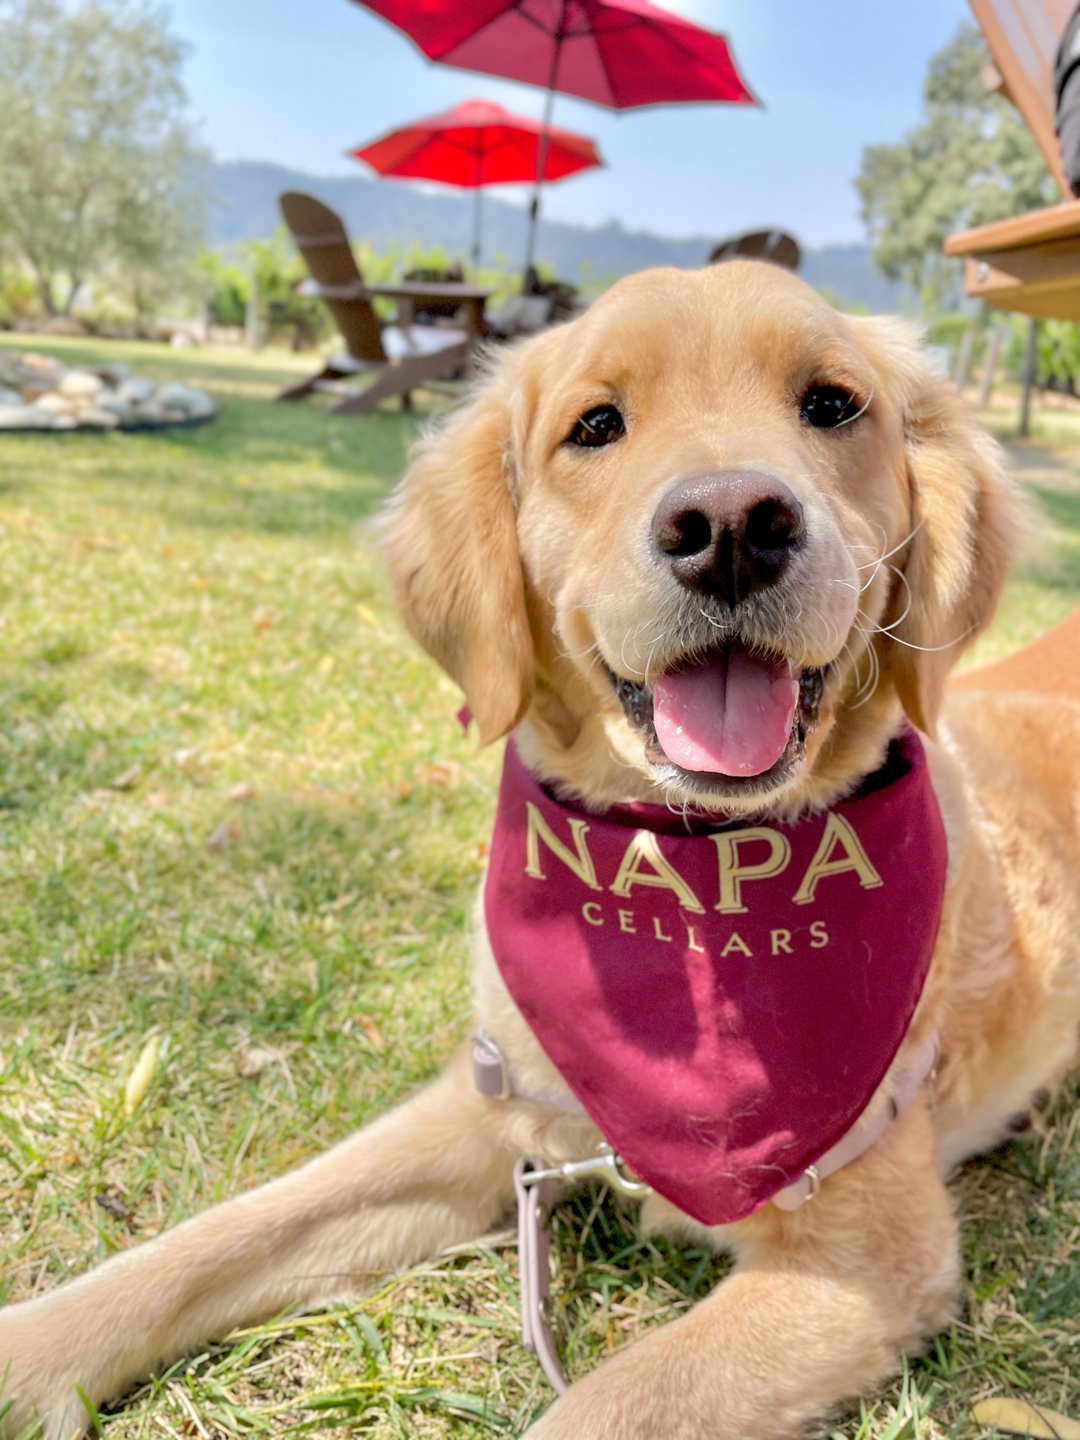 A dog at Napa Cellars; a great place to have a picnic in Napa